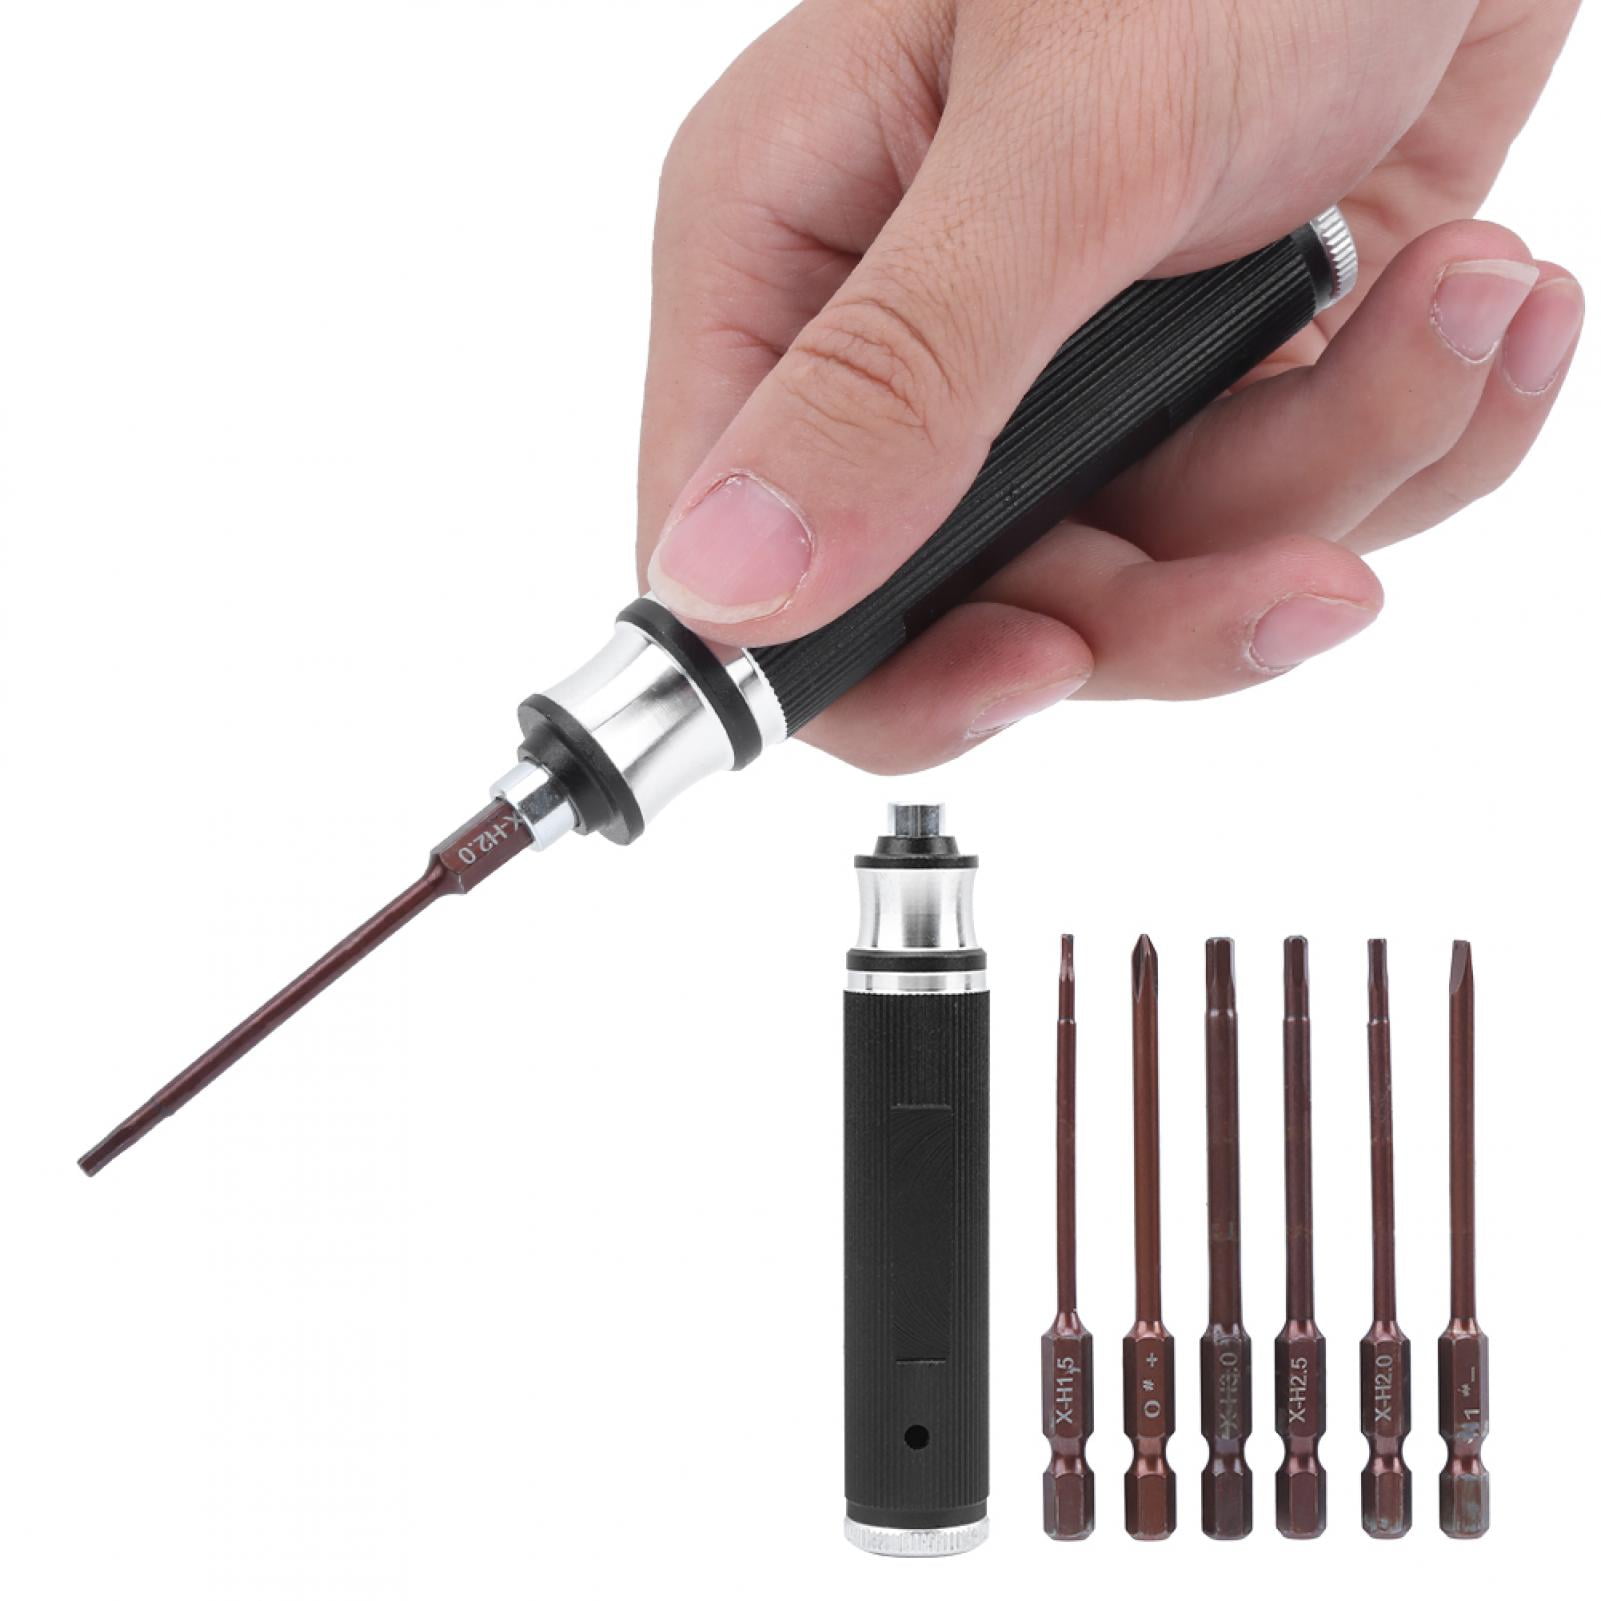 6 in 1 Multi-Function Hex Screwdriver Repair Tool Kit for RC Buggy Quadcopter